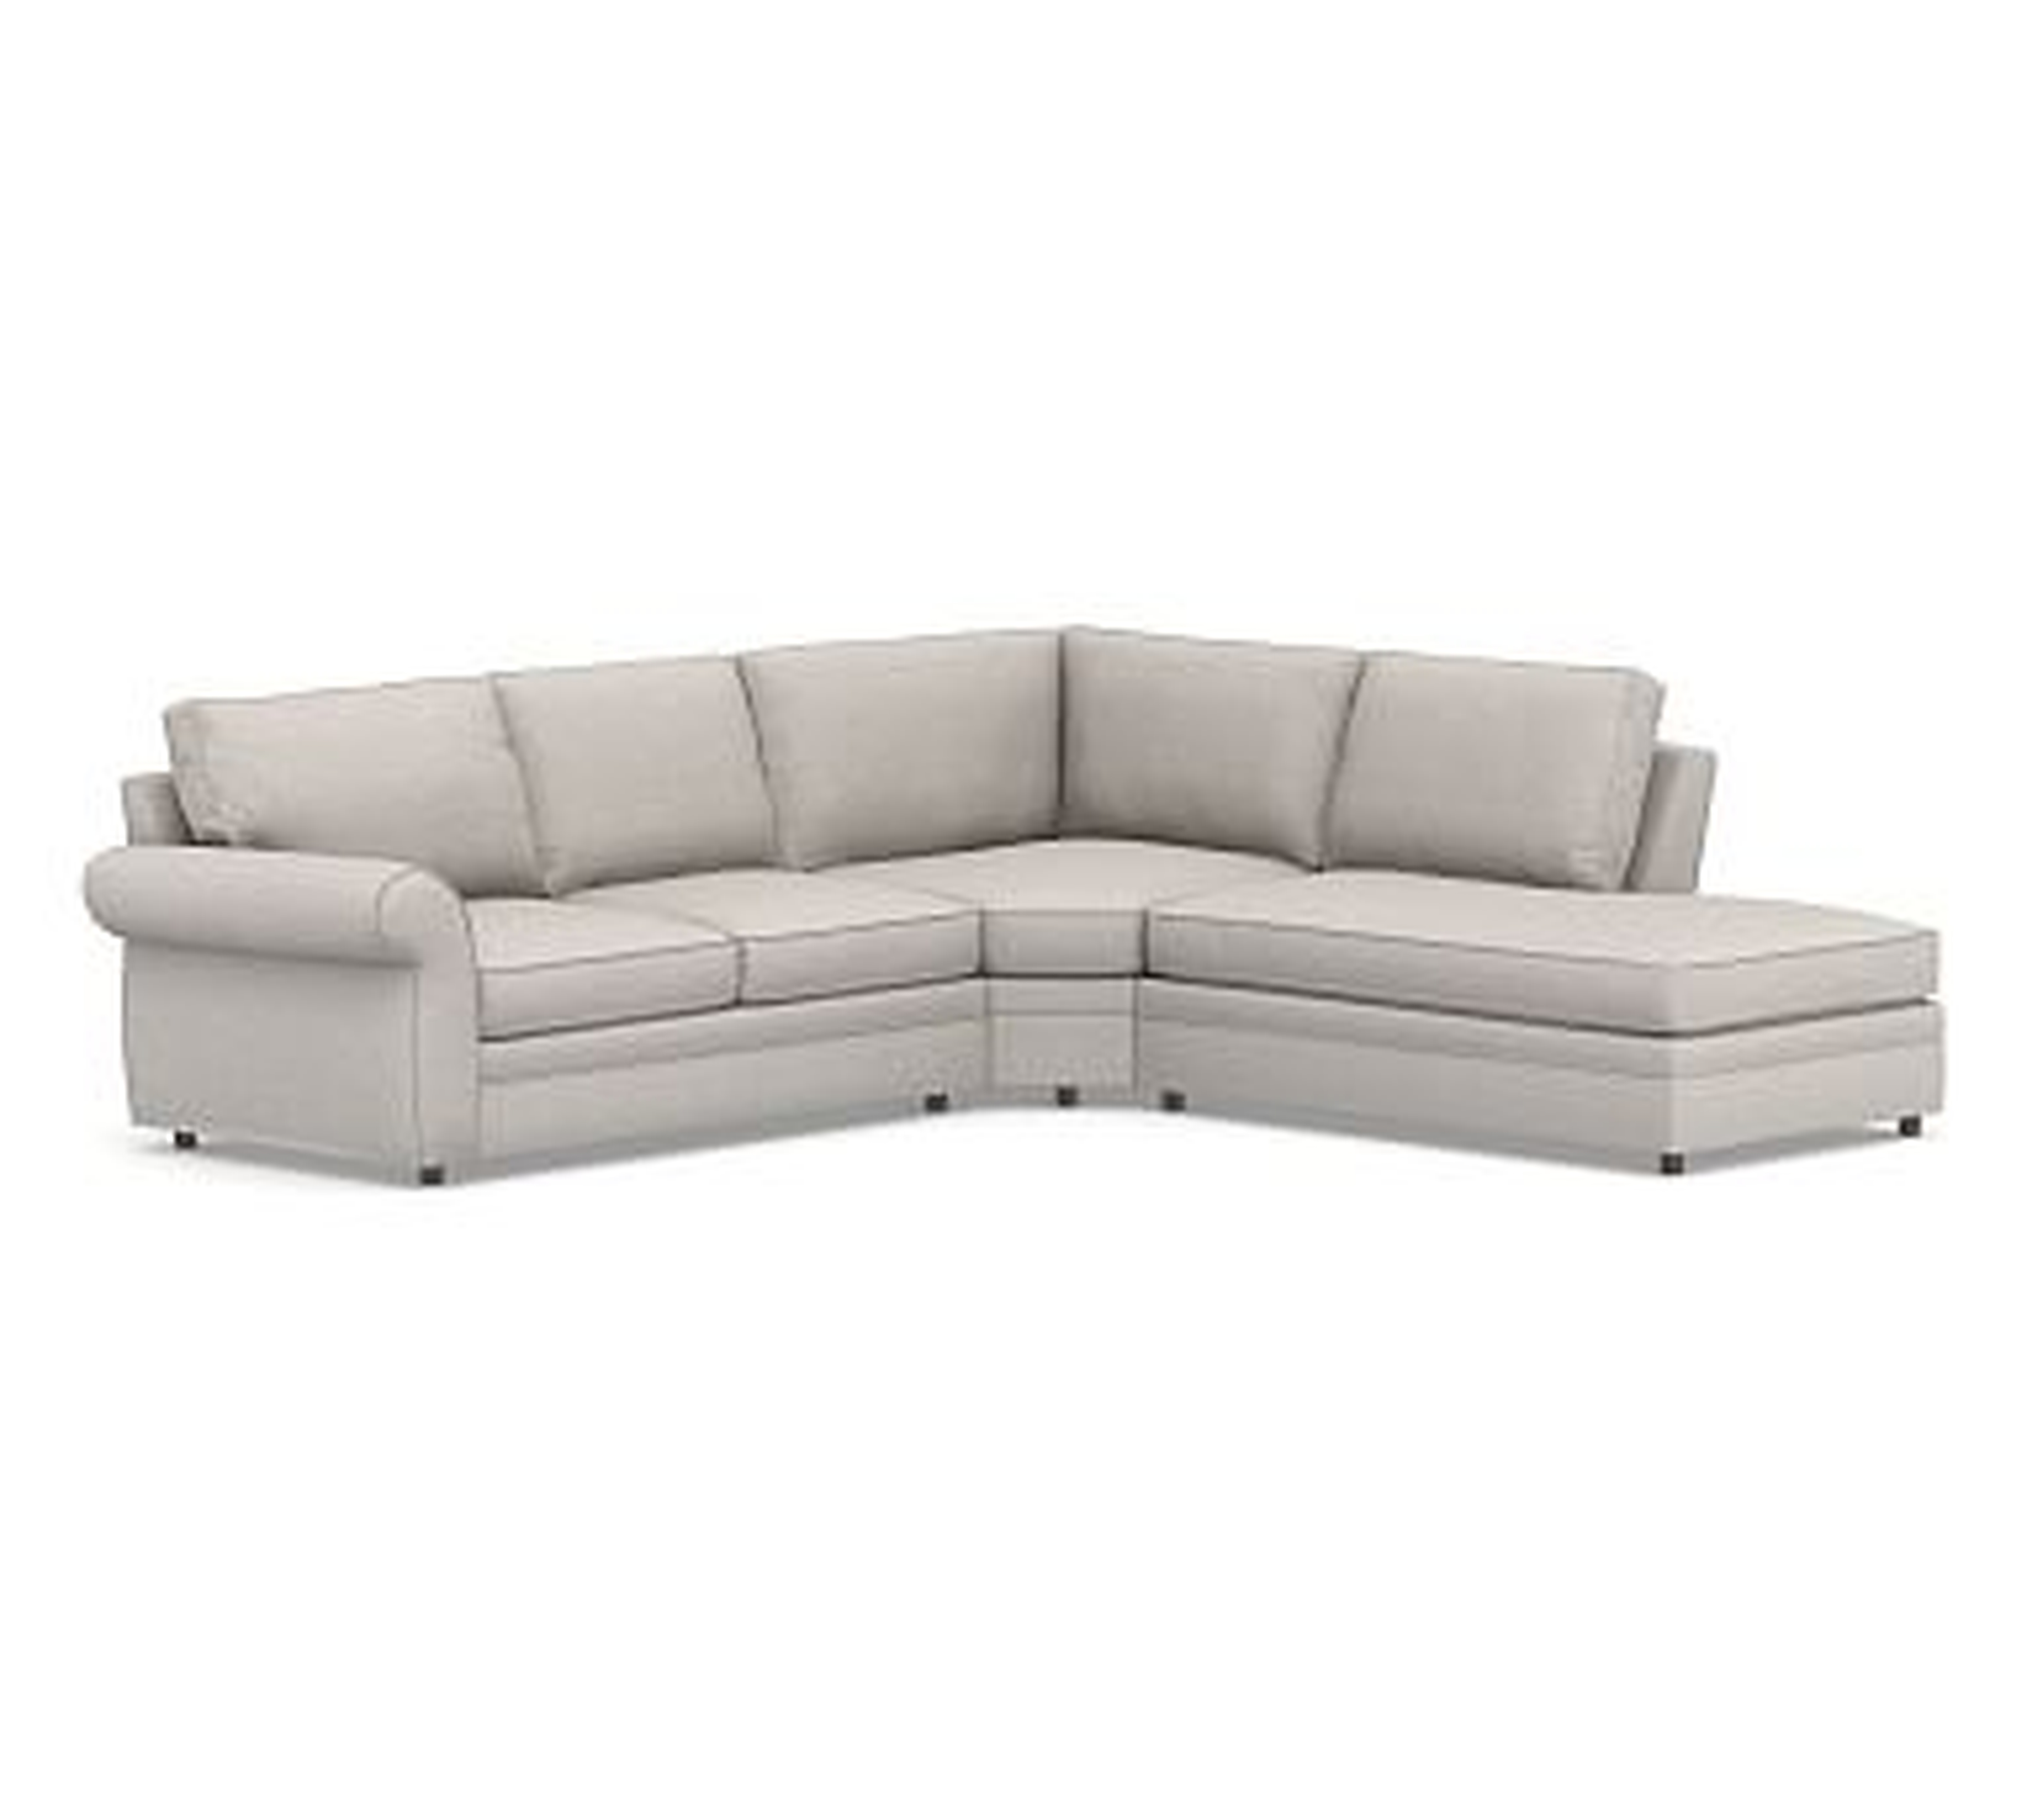 Pearce Roll Arm Upholstered Left 3-Piece Bumper Wedge Sectional, Down Blend Wrapped Cushions, Heathered Twill Stone - Pottery Barn